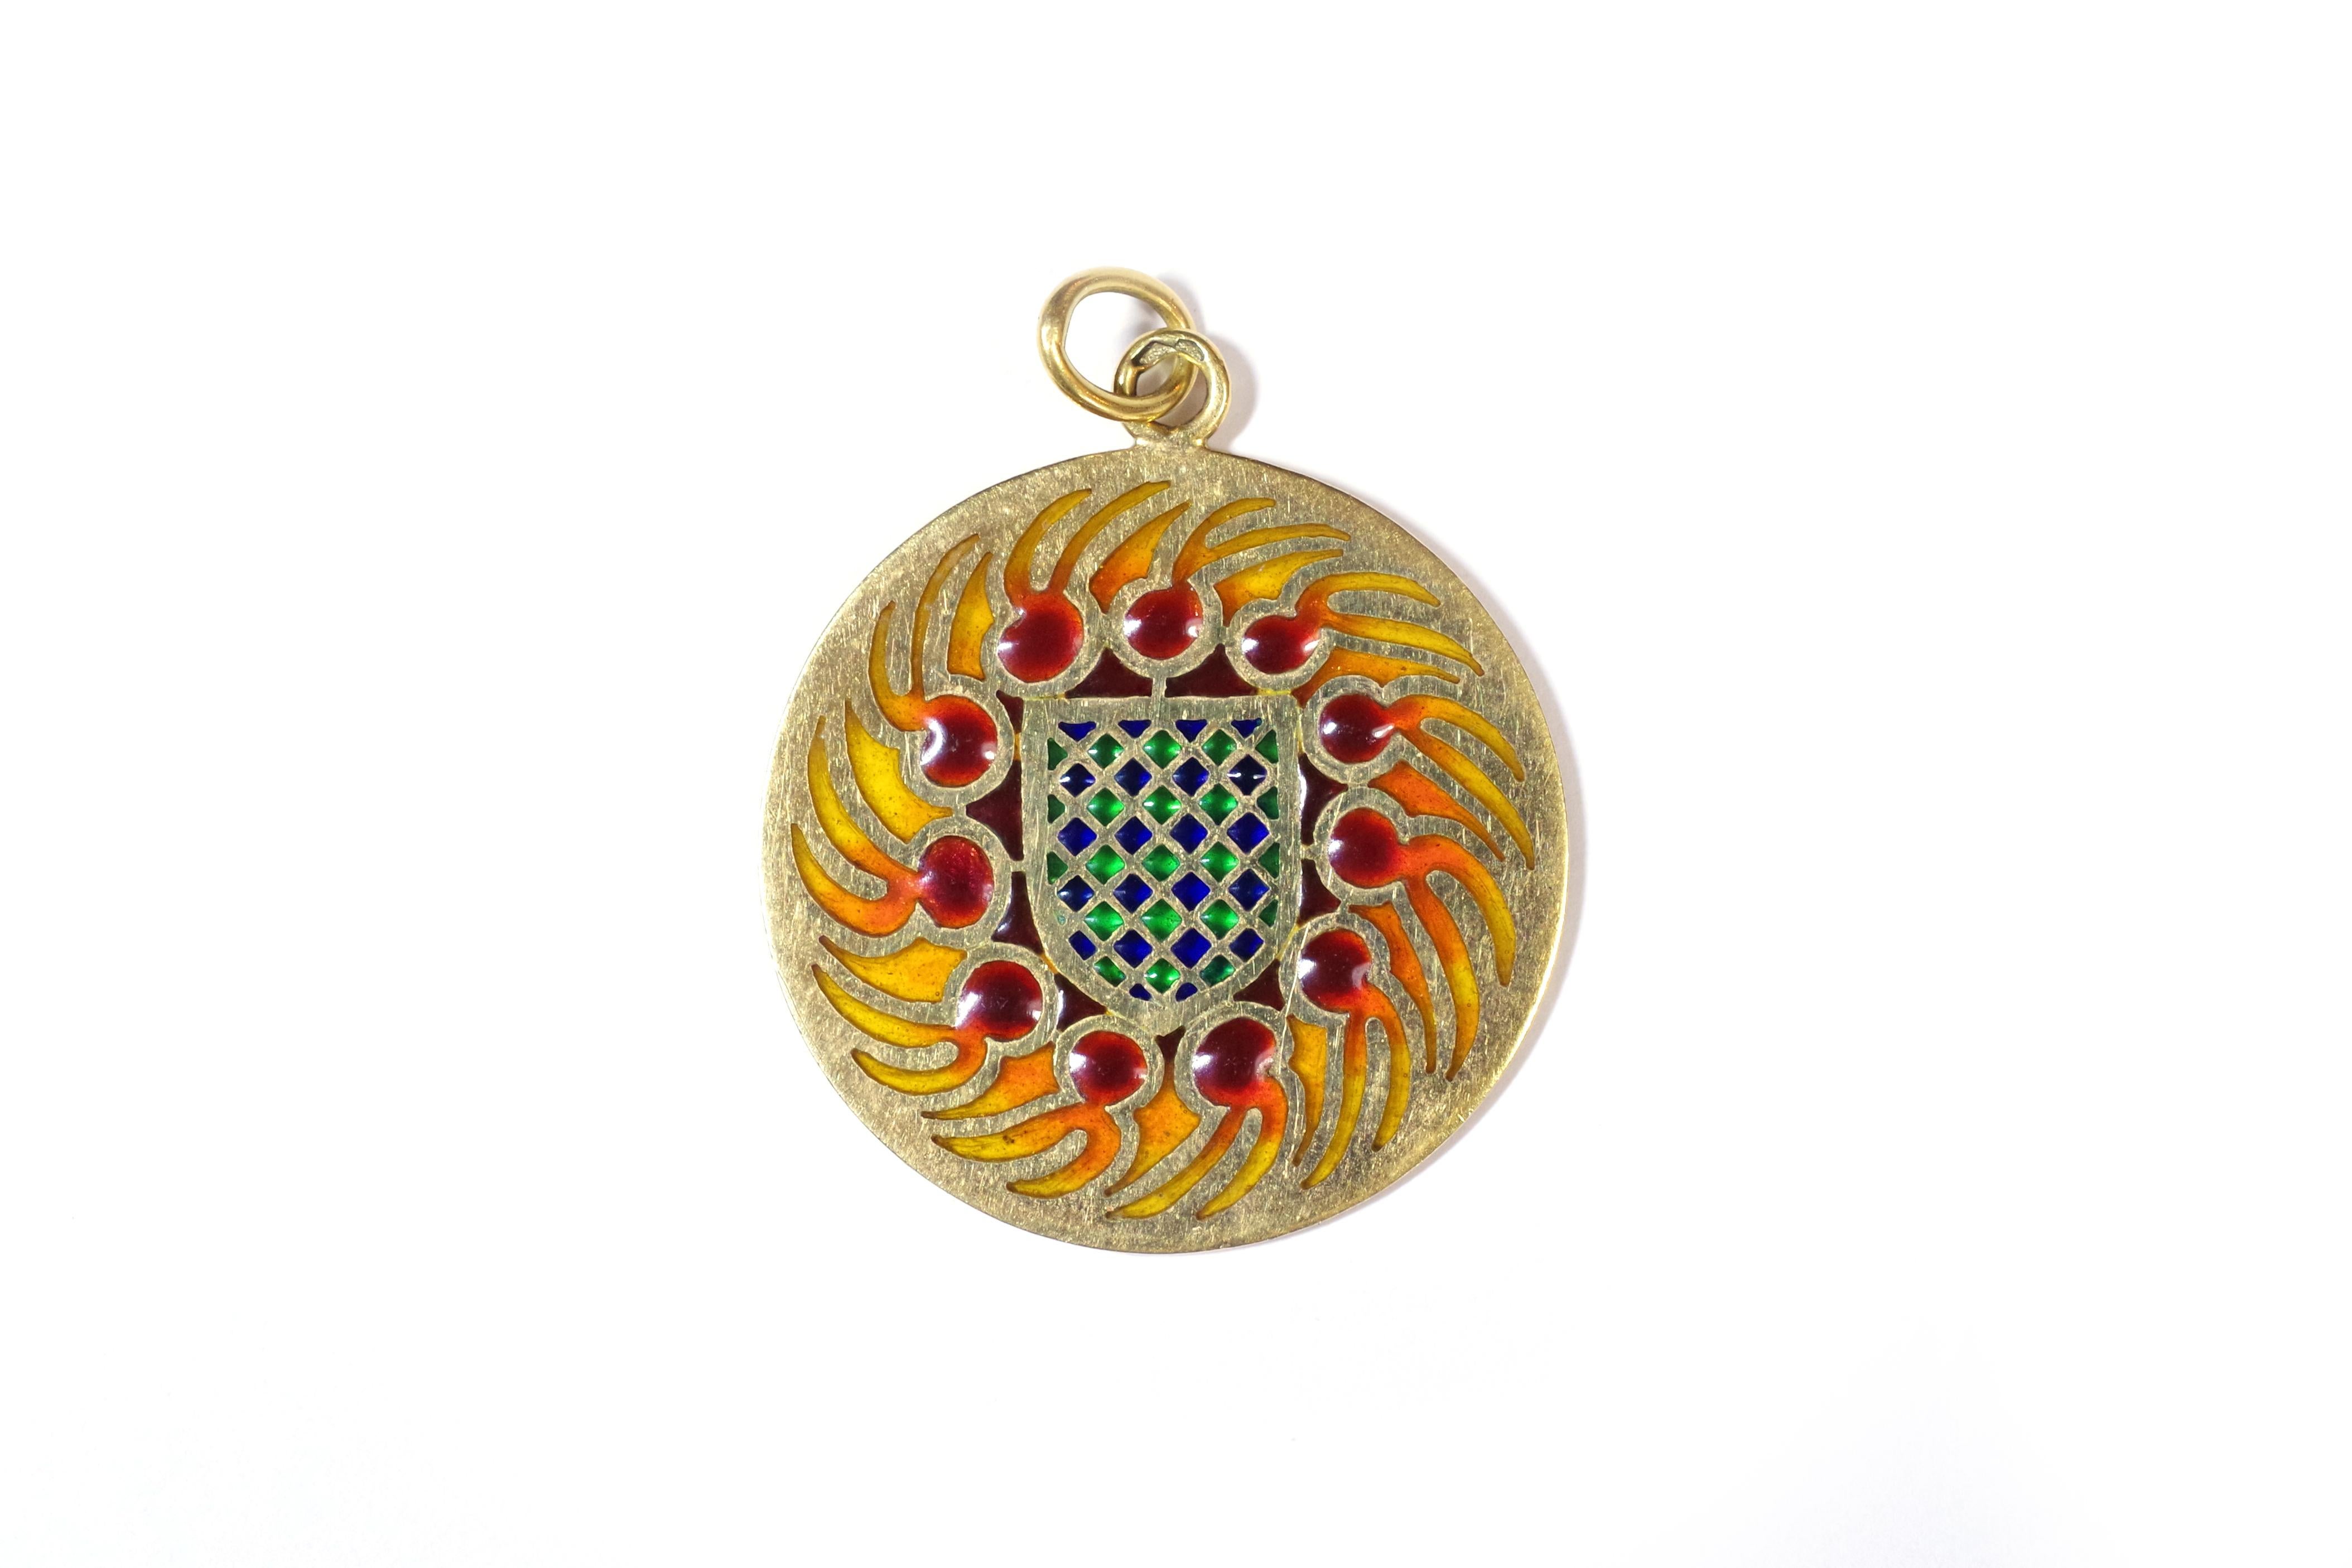 Pendant stained glass enamel in yellow gold 18 karats. Circular medallion decorated with translucent enamel or 